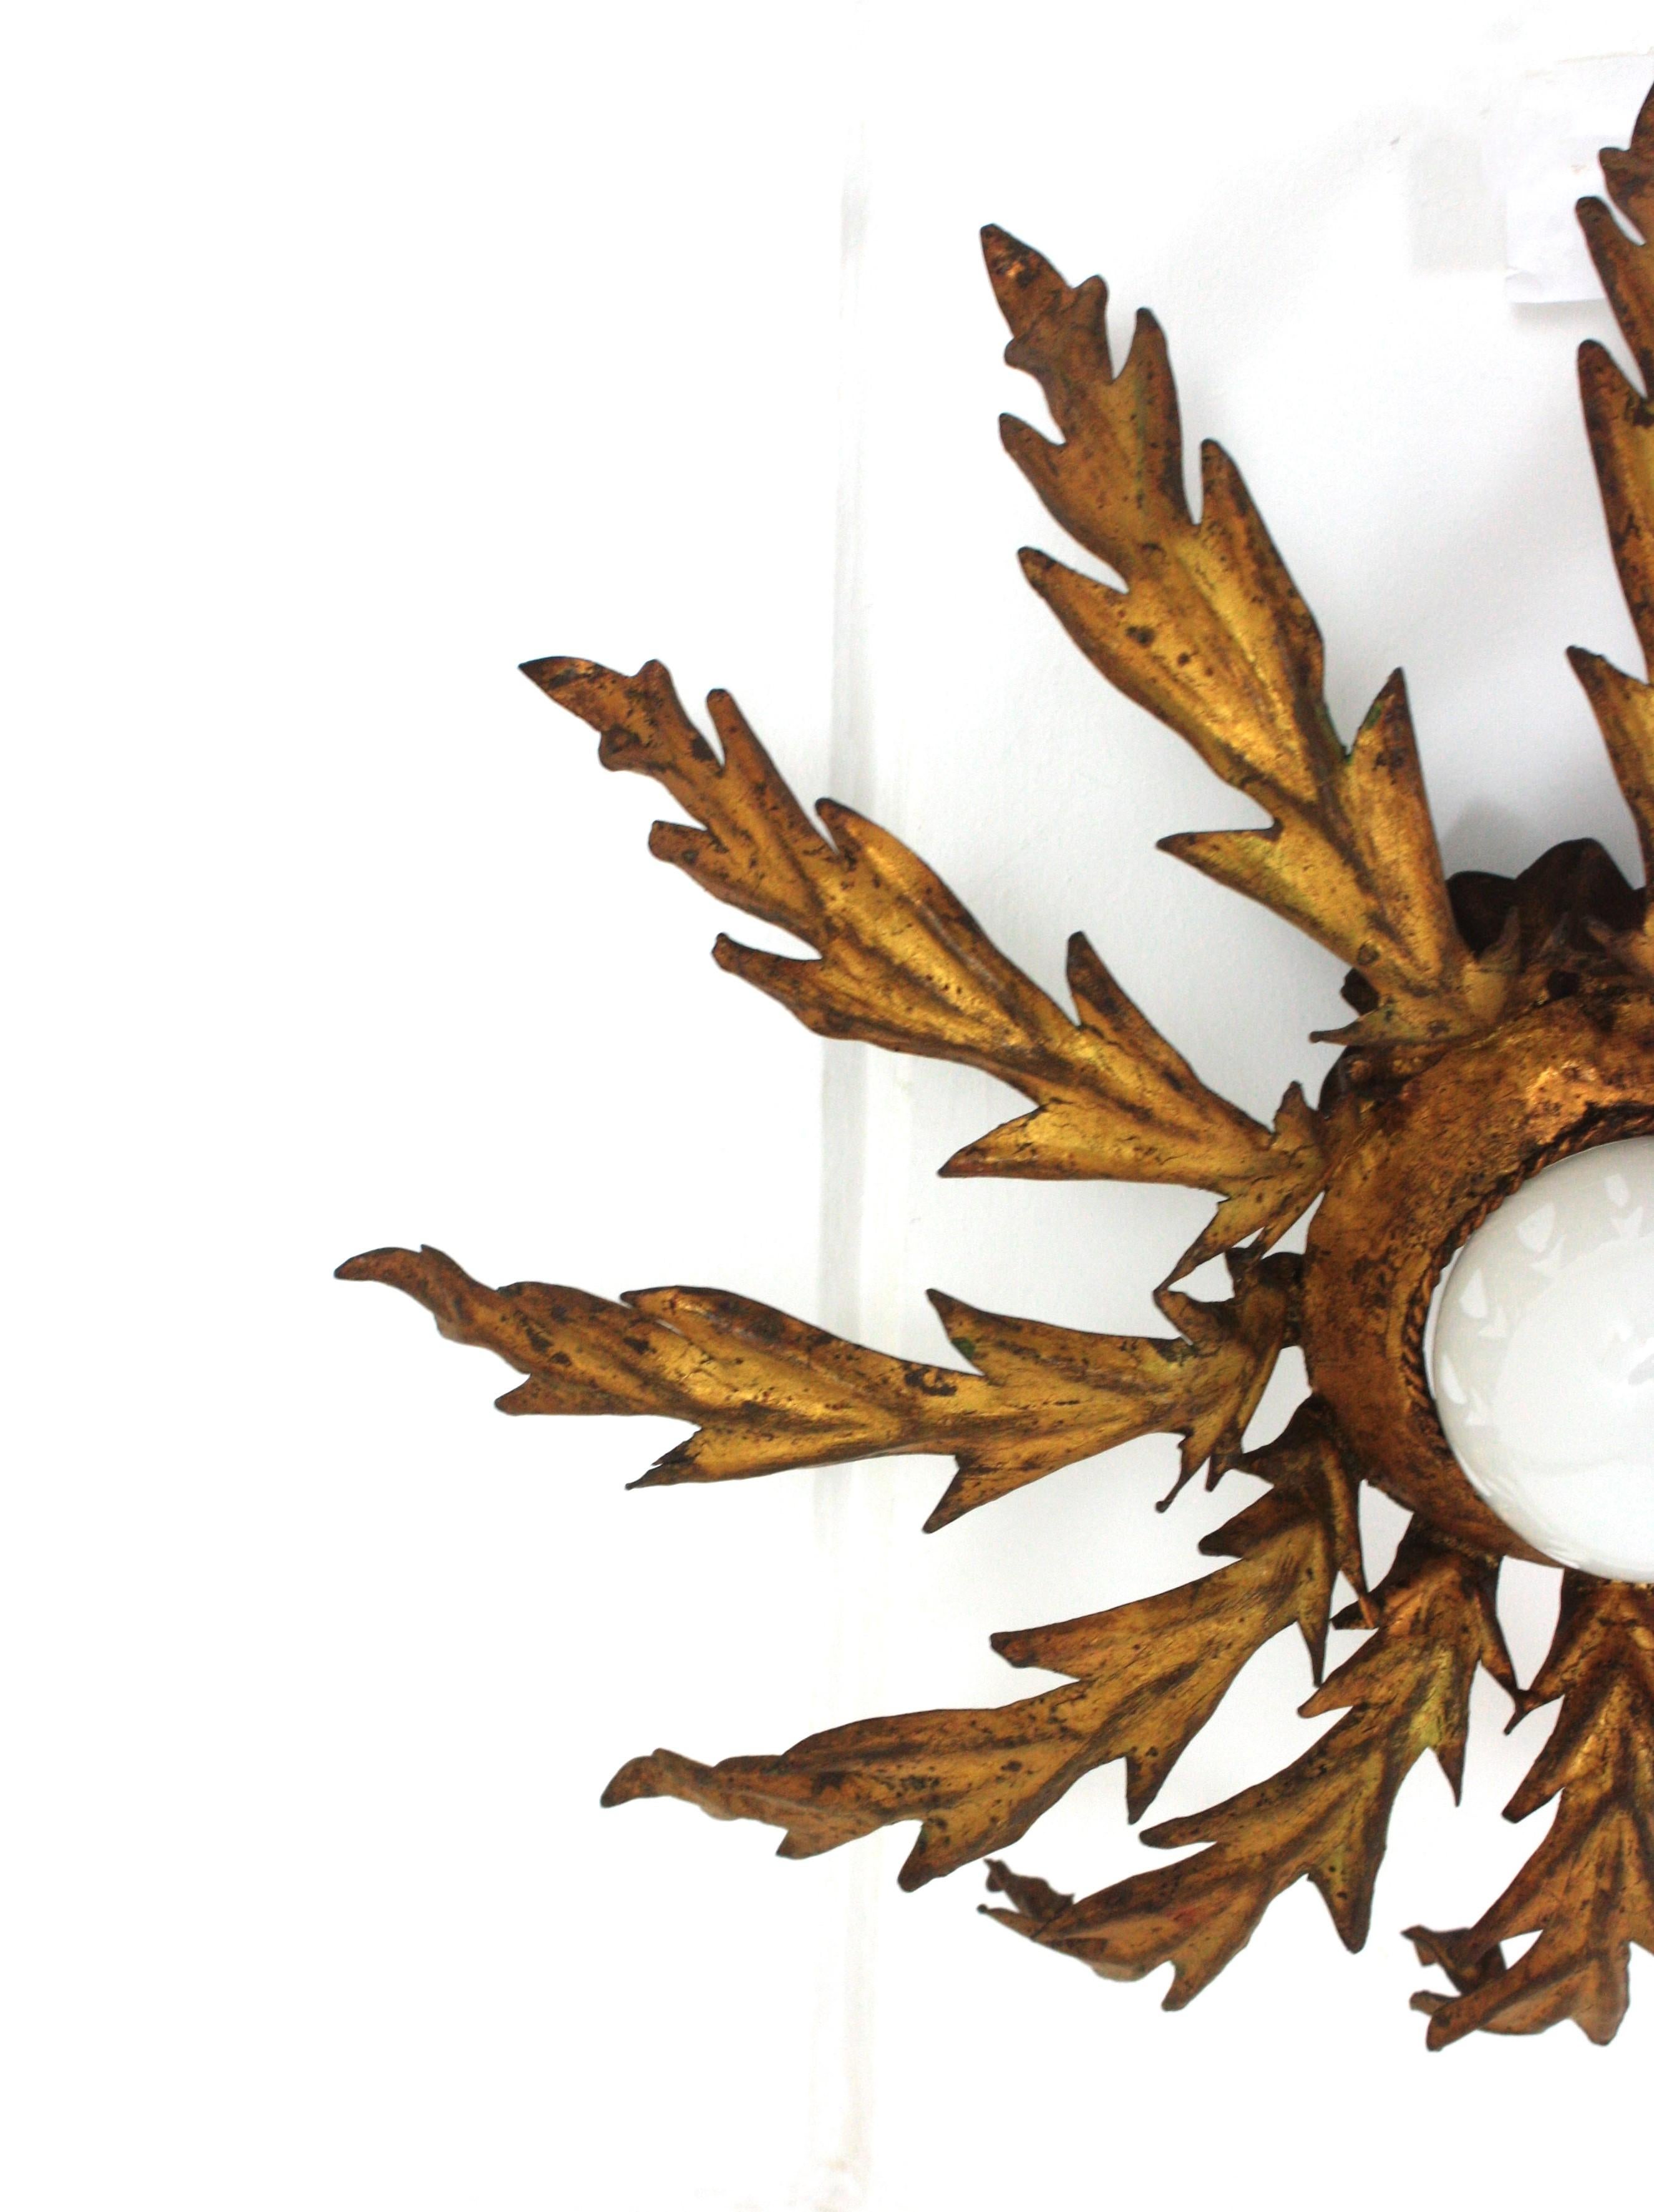 French Sunburst Leafed Ceiling Light Fixture in Gilt Iron, 1940s For Sale 7